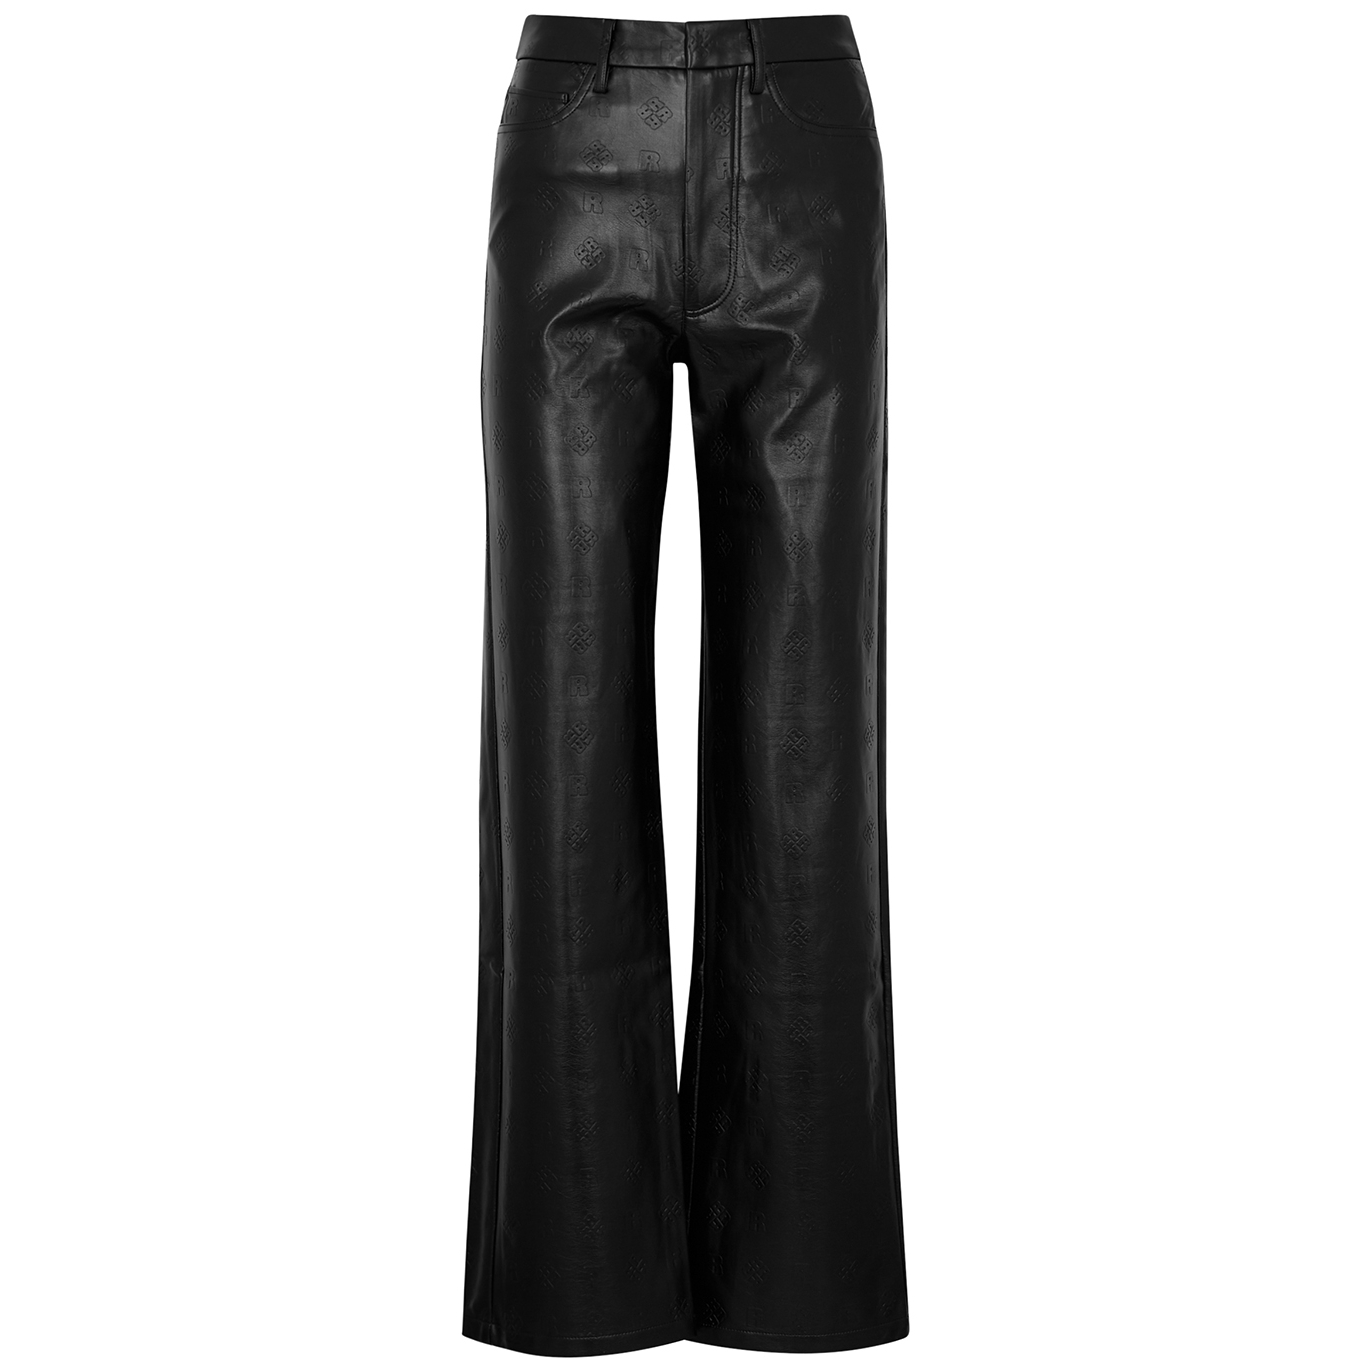 Rotate Birger Christensen Roti Black Faux Leather Trousers - 6